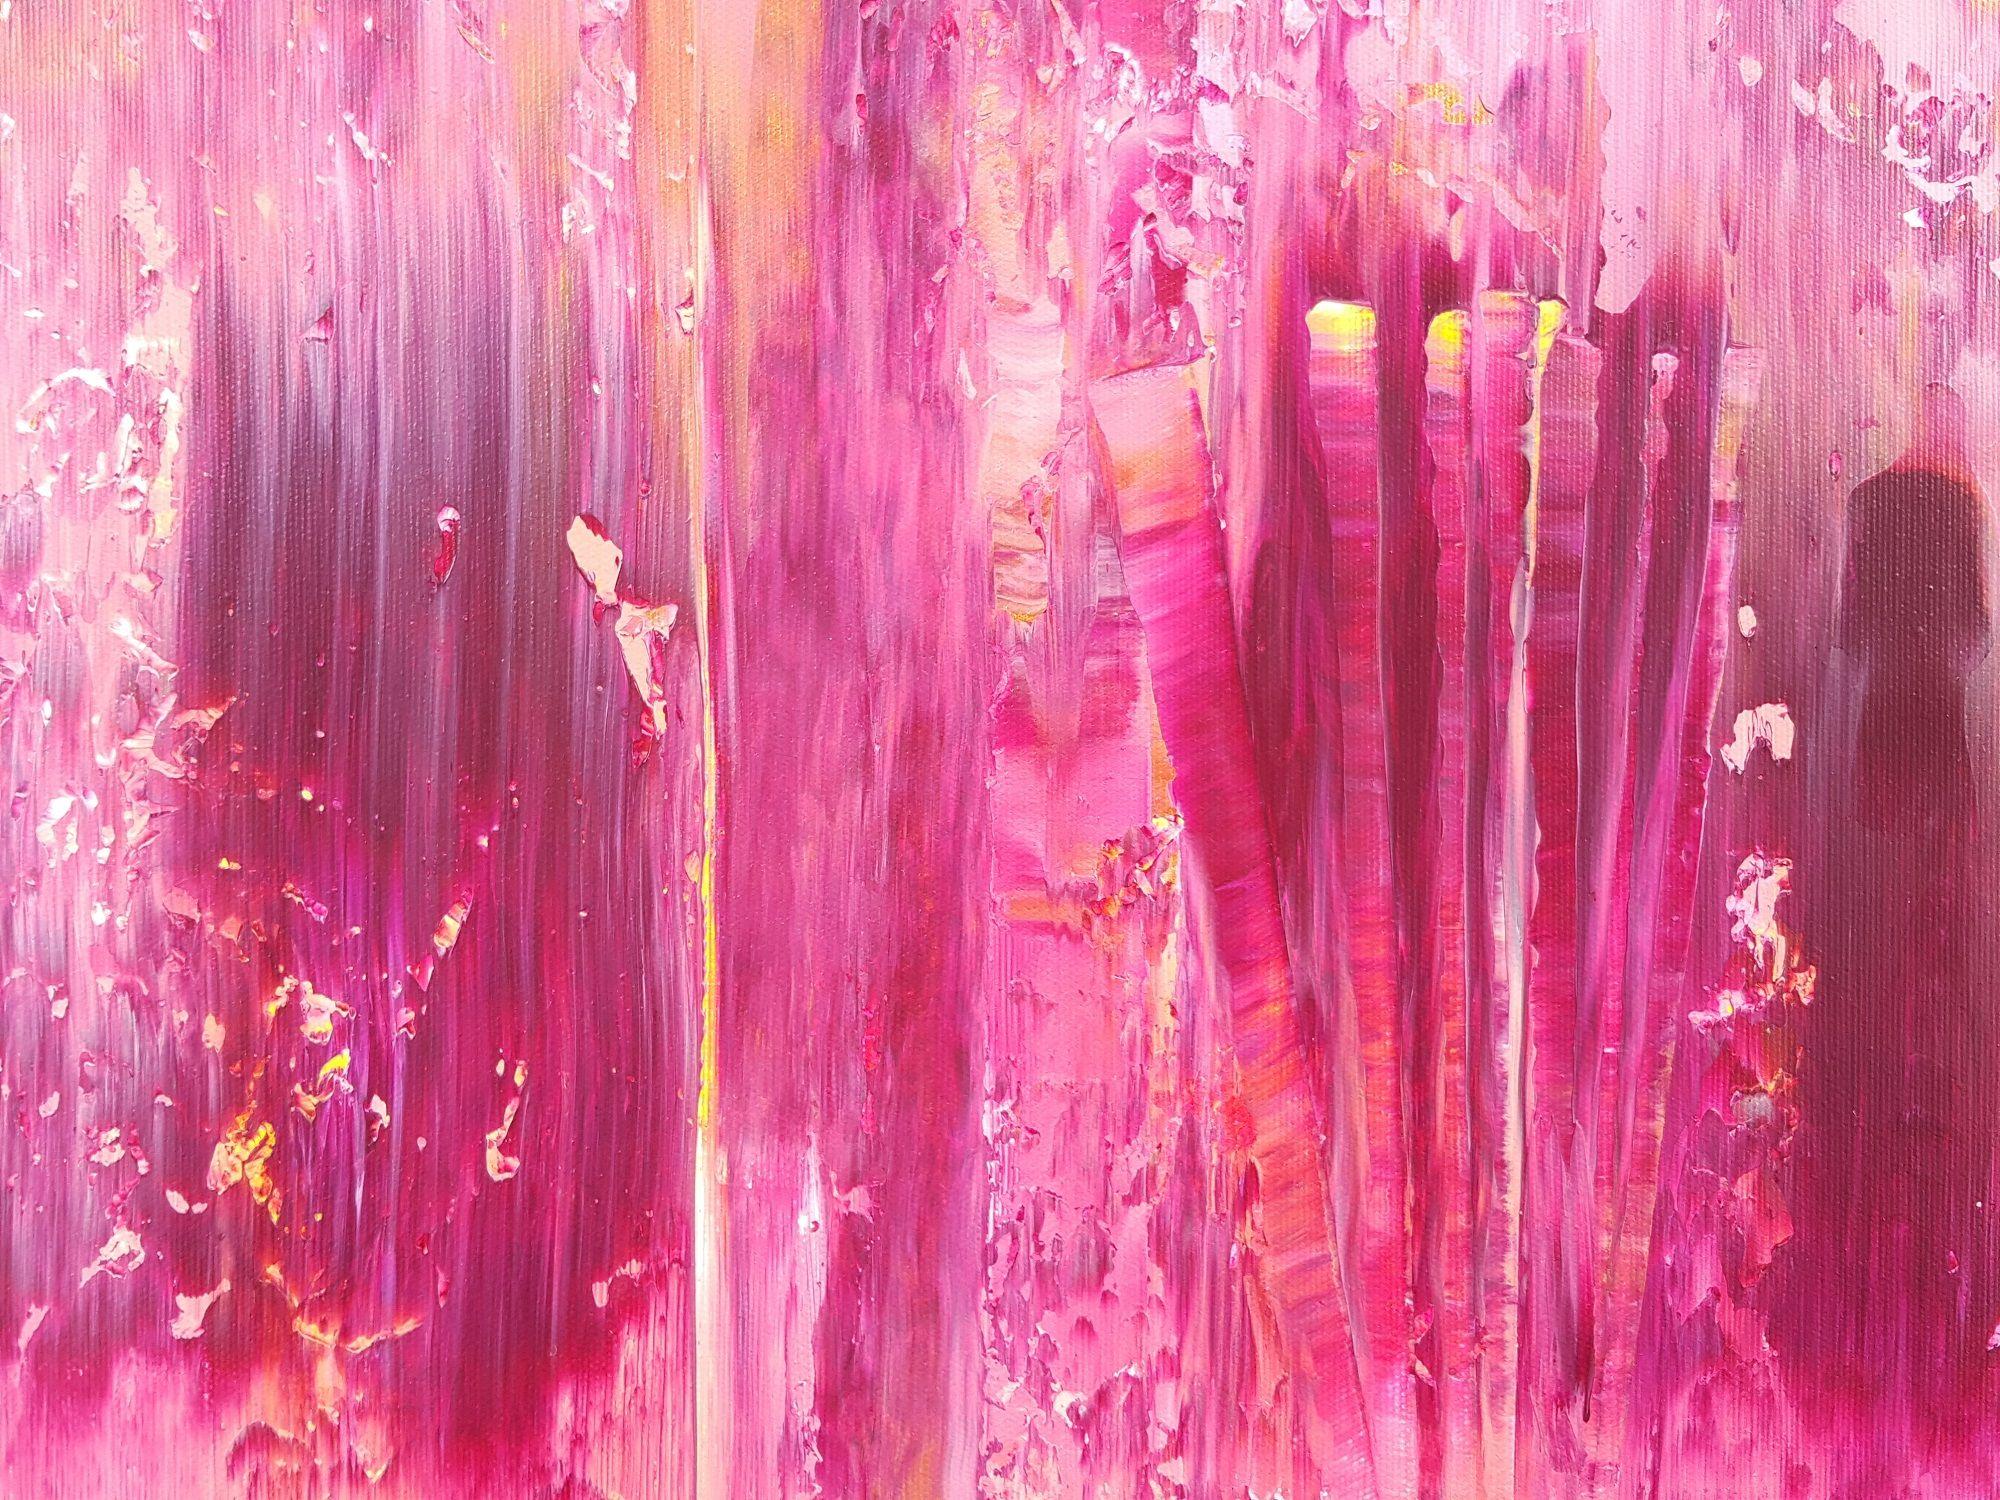 Wild roses, Painting, Acrylic on Canvas - Pink Abstract Painting by Ivana Olbricht